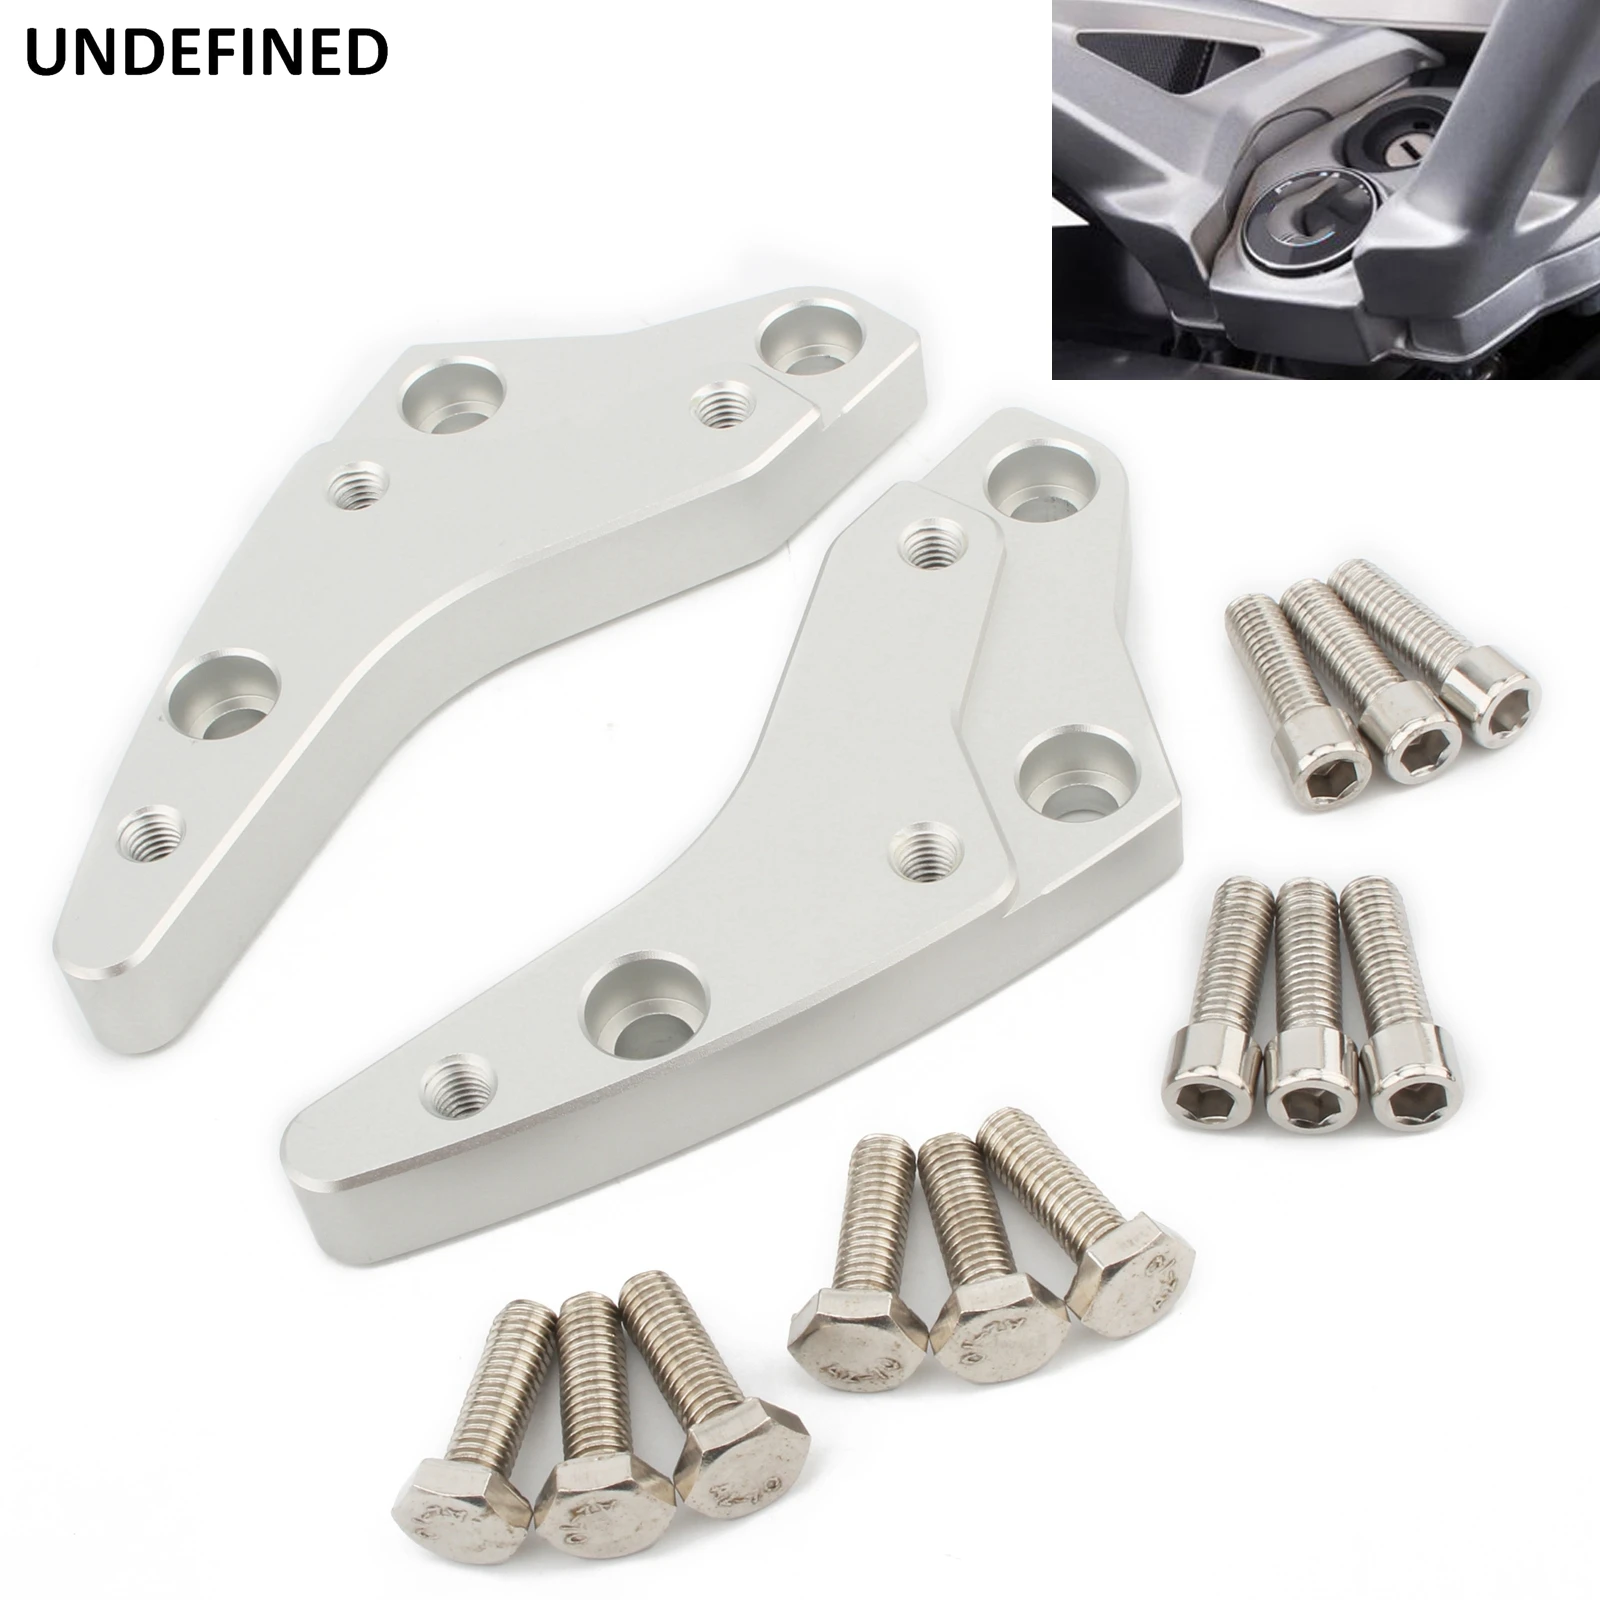 

Motorcycle Handlebar Riser Mount Clamp Height up Adapters Aluminum Silver Risers for BMW K1600GT K1600GTL 2012-2019 K1600B